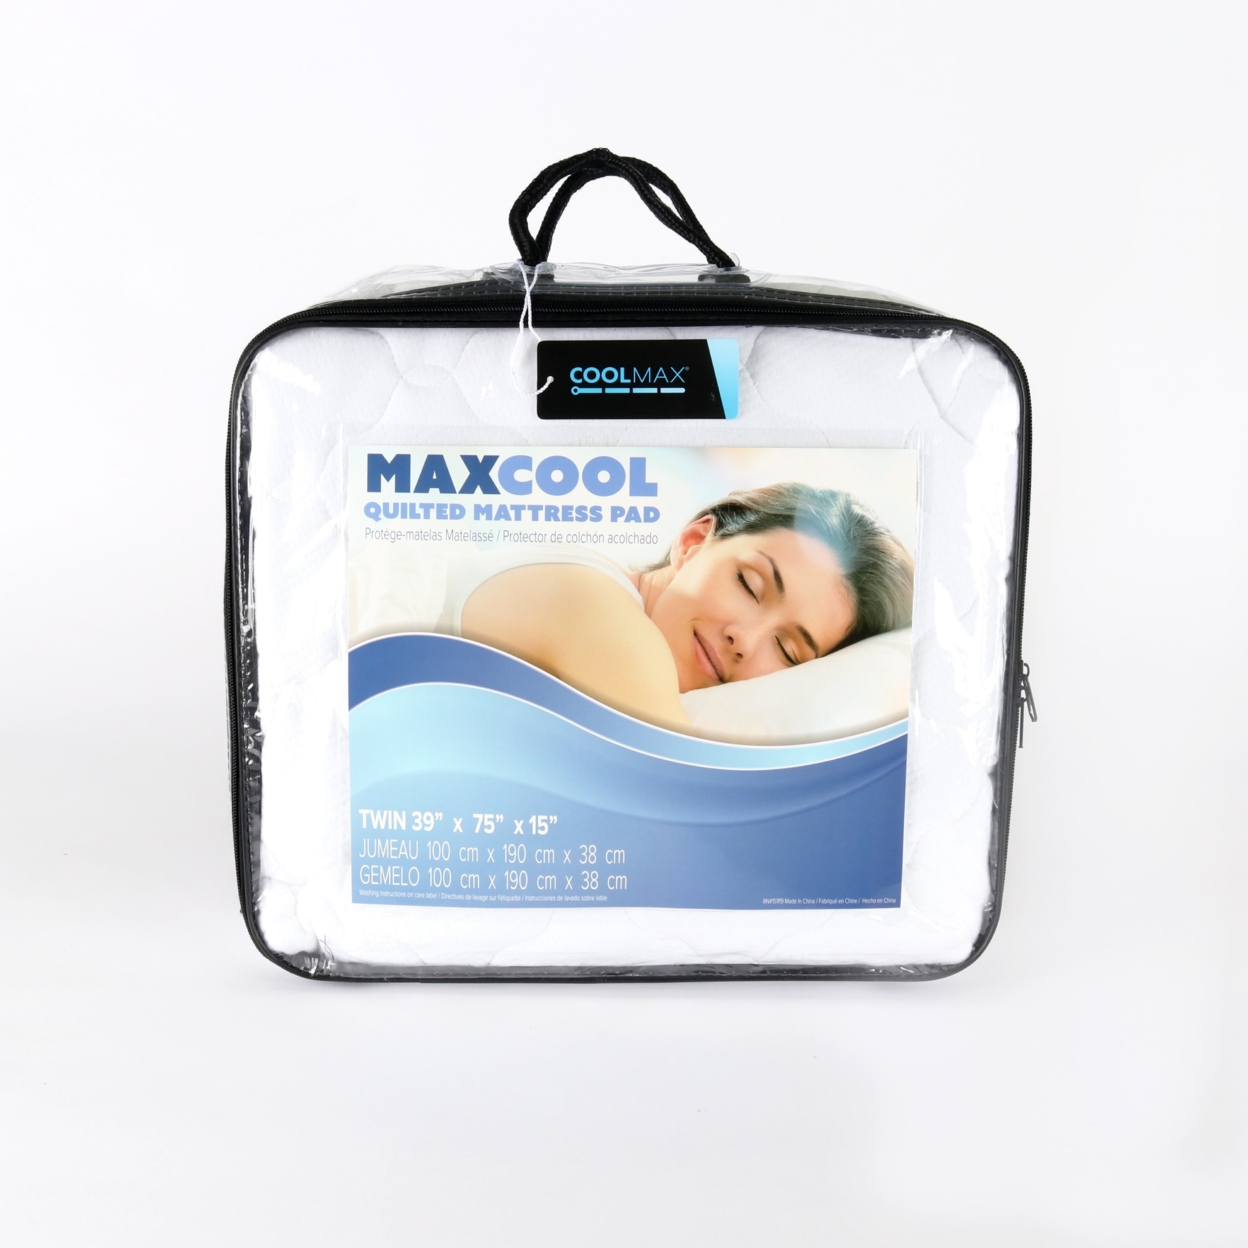 Max Cool Cooling Mattress Pad, Hypo-allergenic, Quilted Honeycomb Microfiber Top Layer, 18â Deep Fitted Skirt, Multiple Bed Sizes Available - Twin -